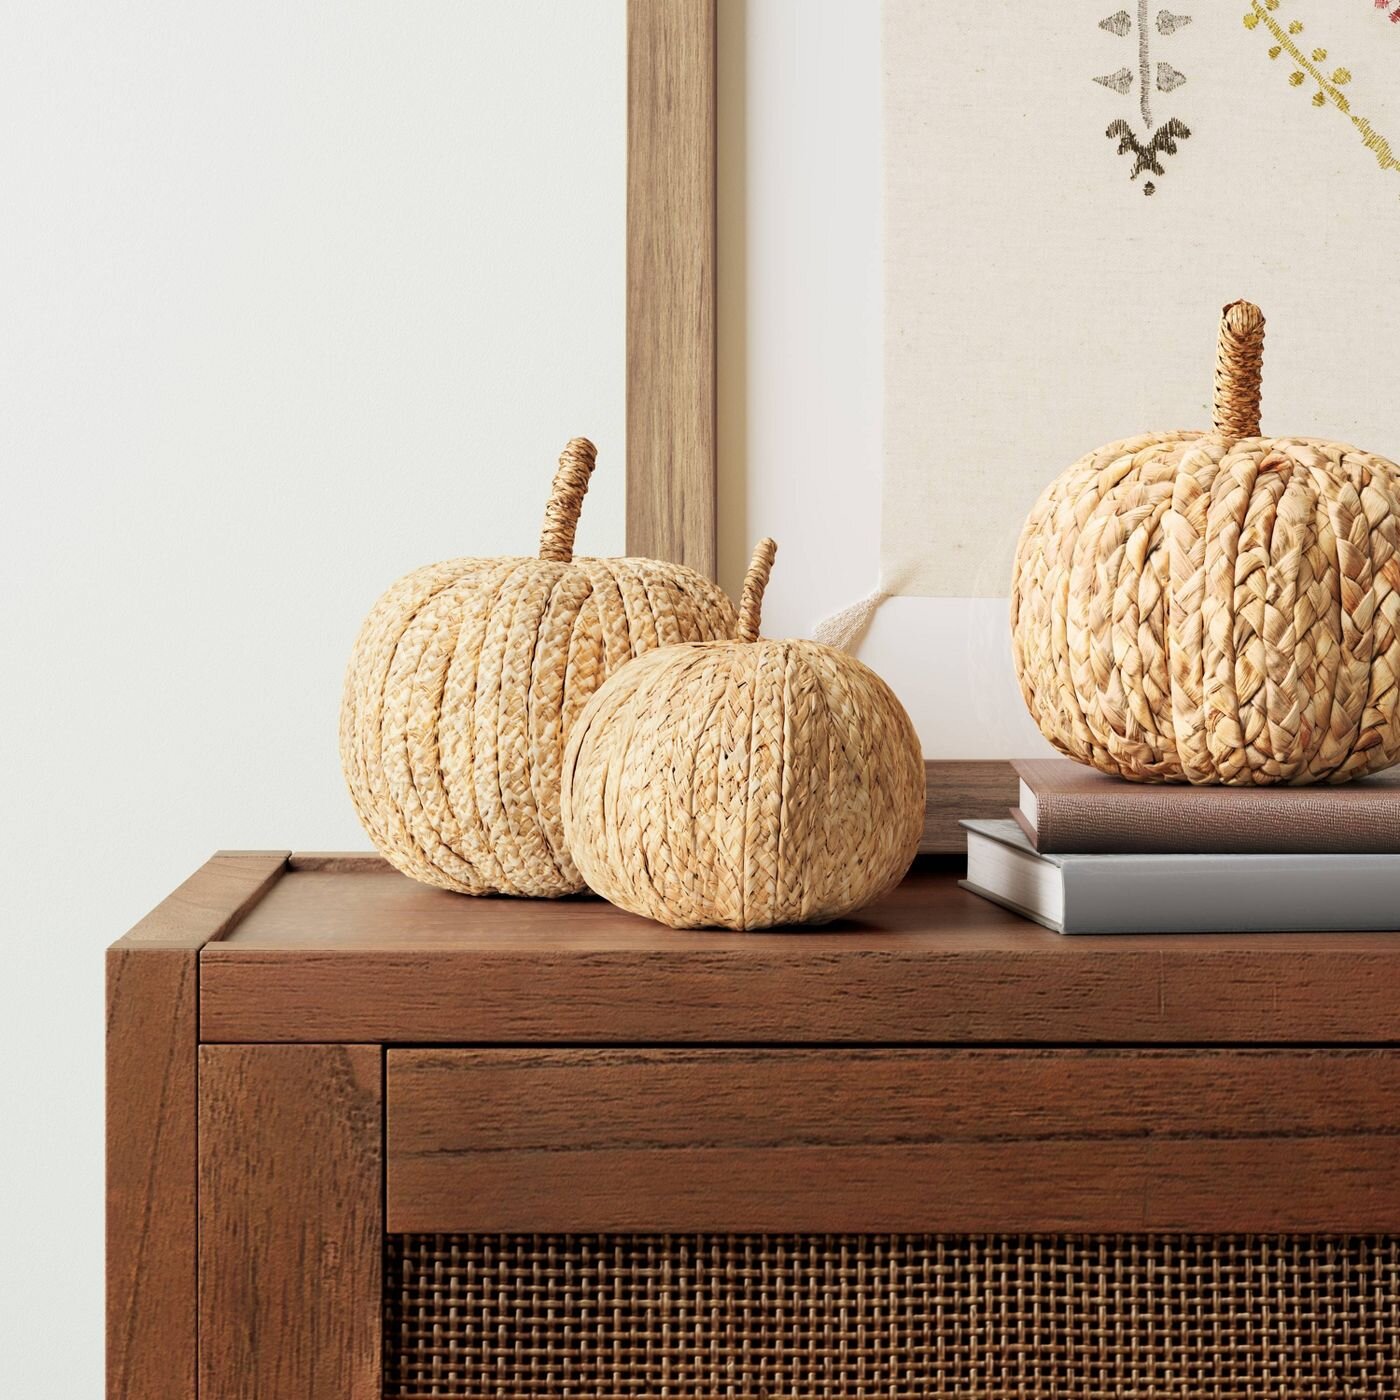 I do think that a little holiday decor is amazing and really does bring joy to all of us! I suggest focusing on things with a longer “shelf” life. Stick with these raffia pumpkins that can transition to Thanksgiving decor instead of a black and oran…